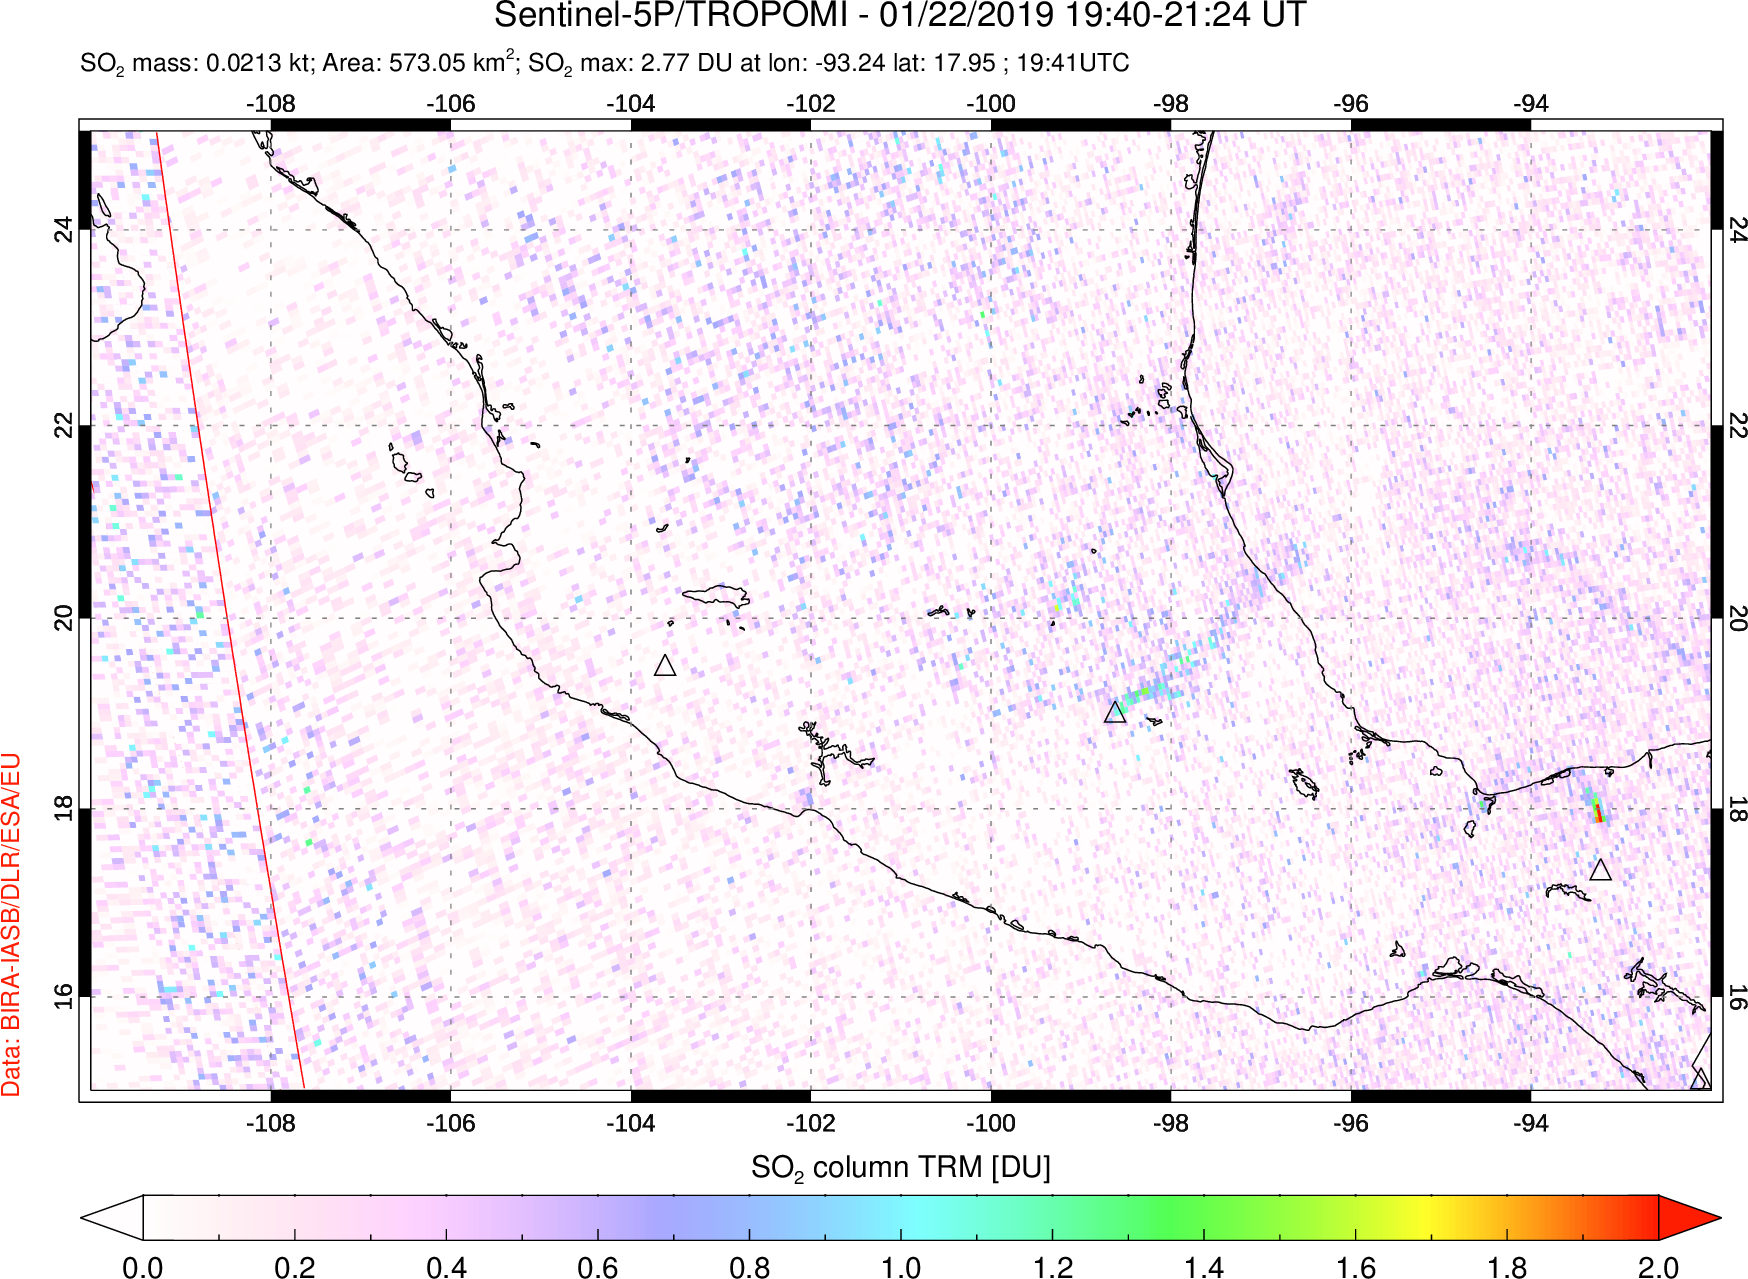 A sulfur dioxide image over Mexico on Jan 22, 2019.